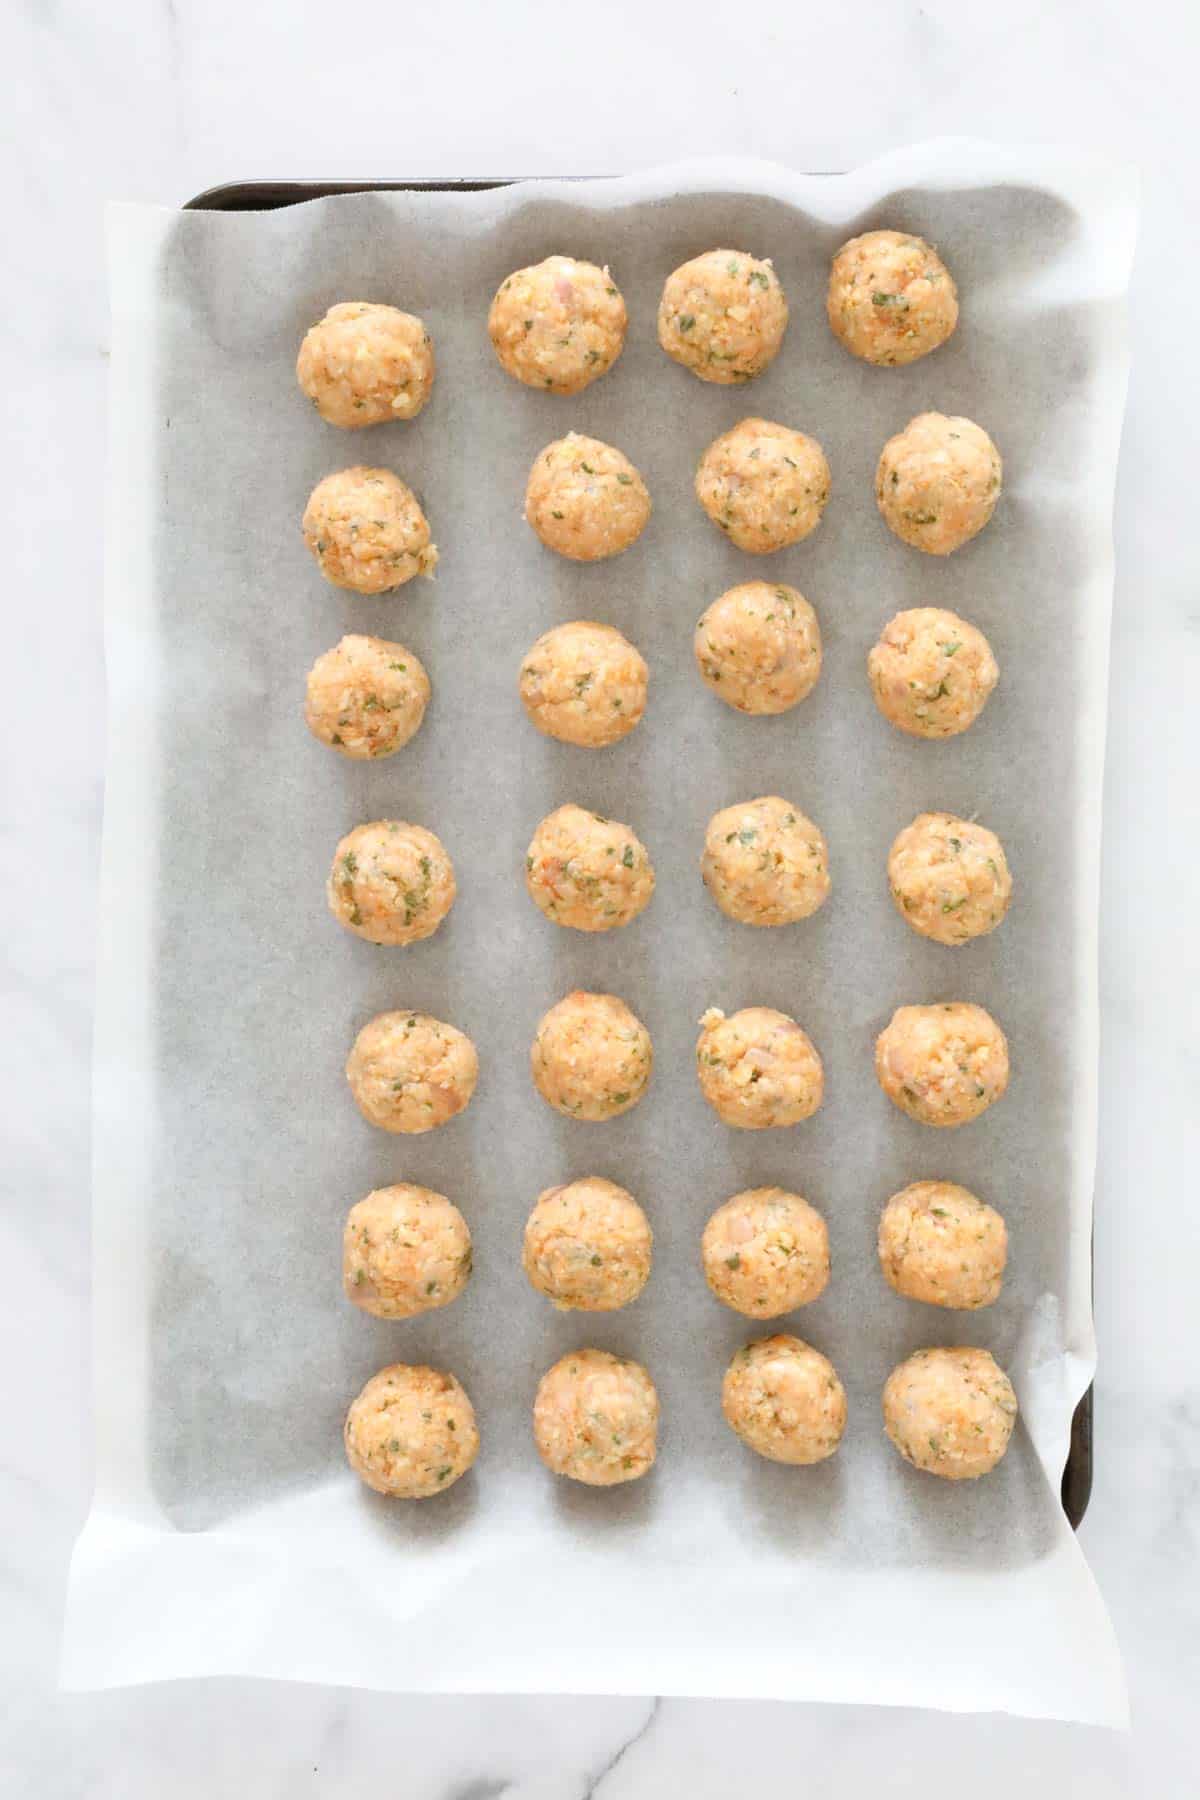 Small round meatballs on baking paper on a baking tray.